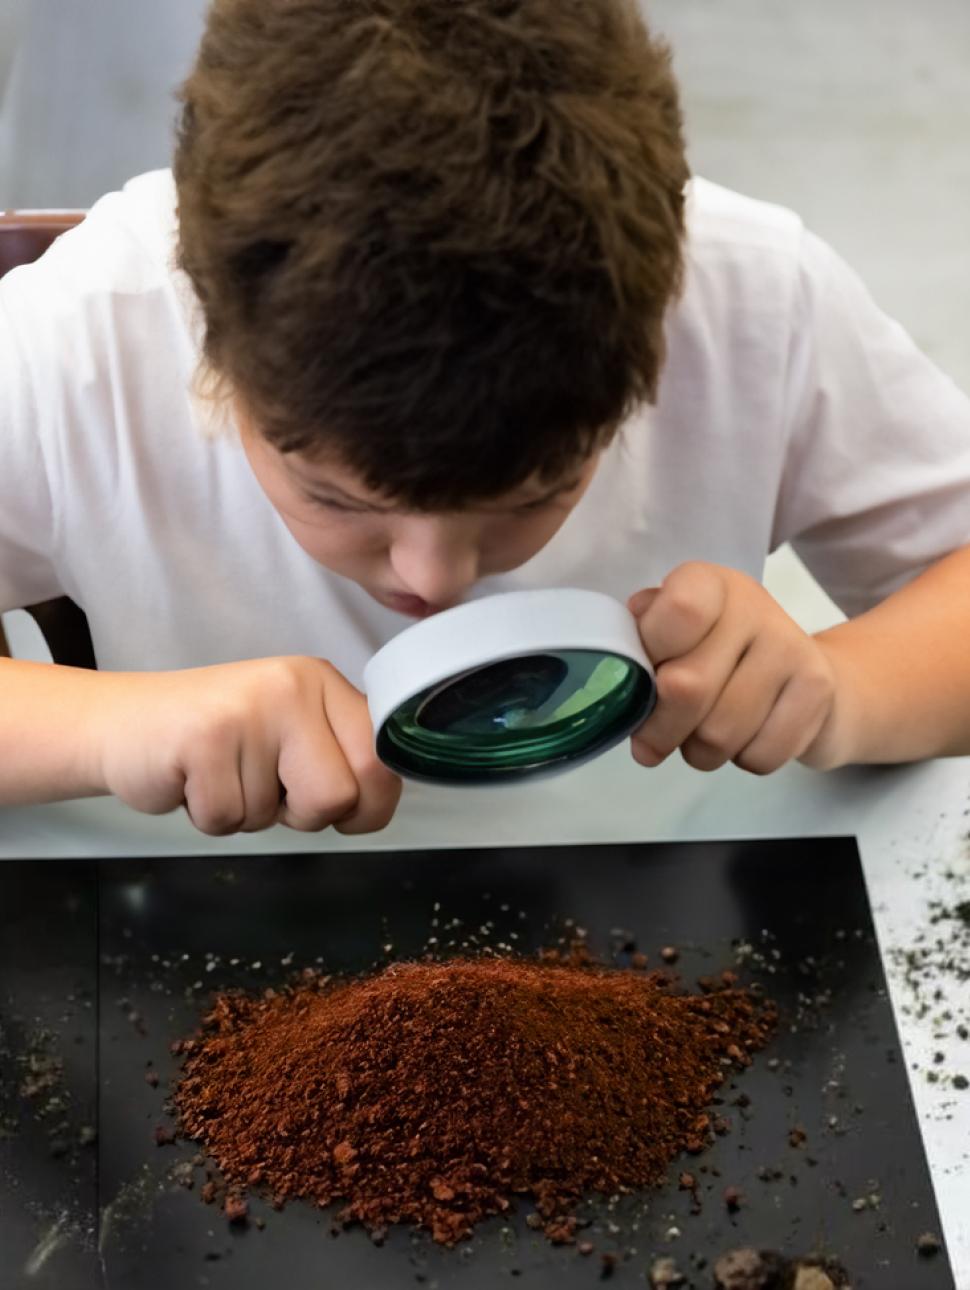 a 12 year old child looks at some soil on black surface through a magnifying glass